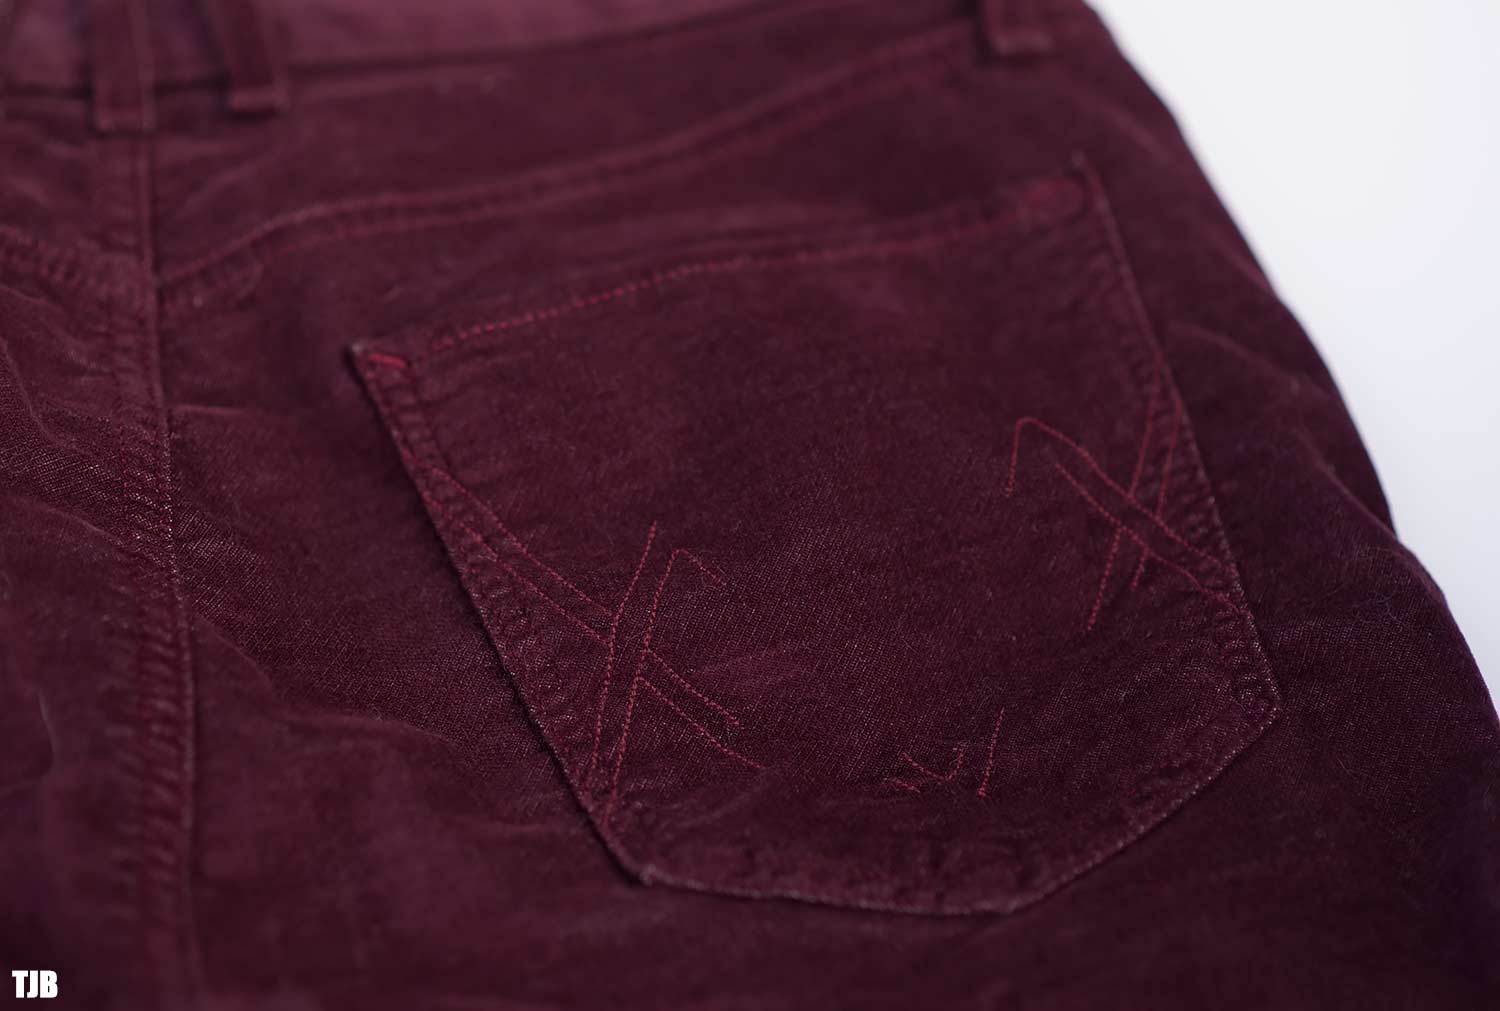 mcguire-denim-newton-exposed-button-skinny-pants-in-pinot-review-4